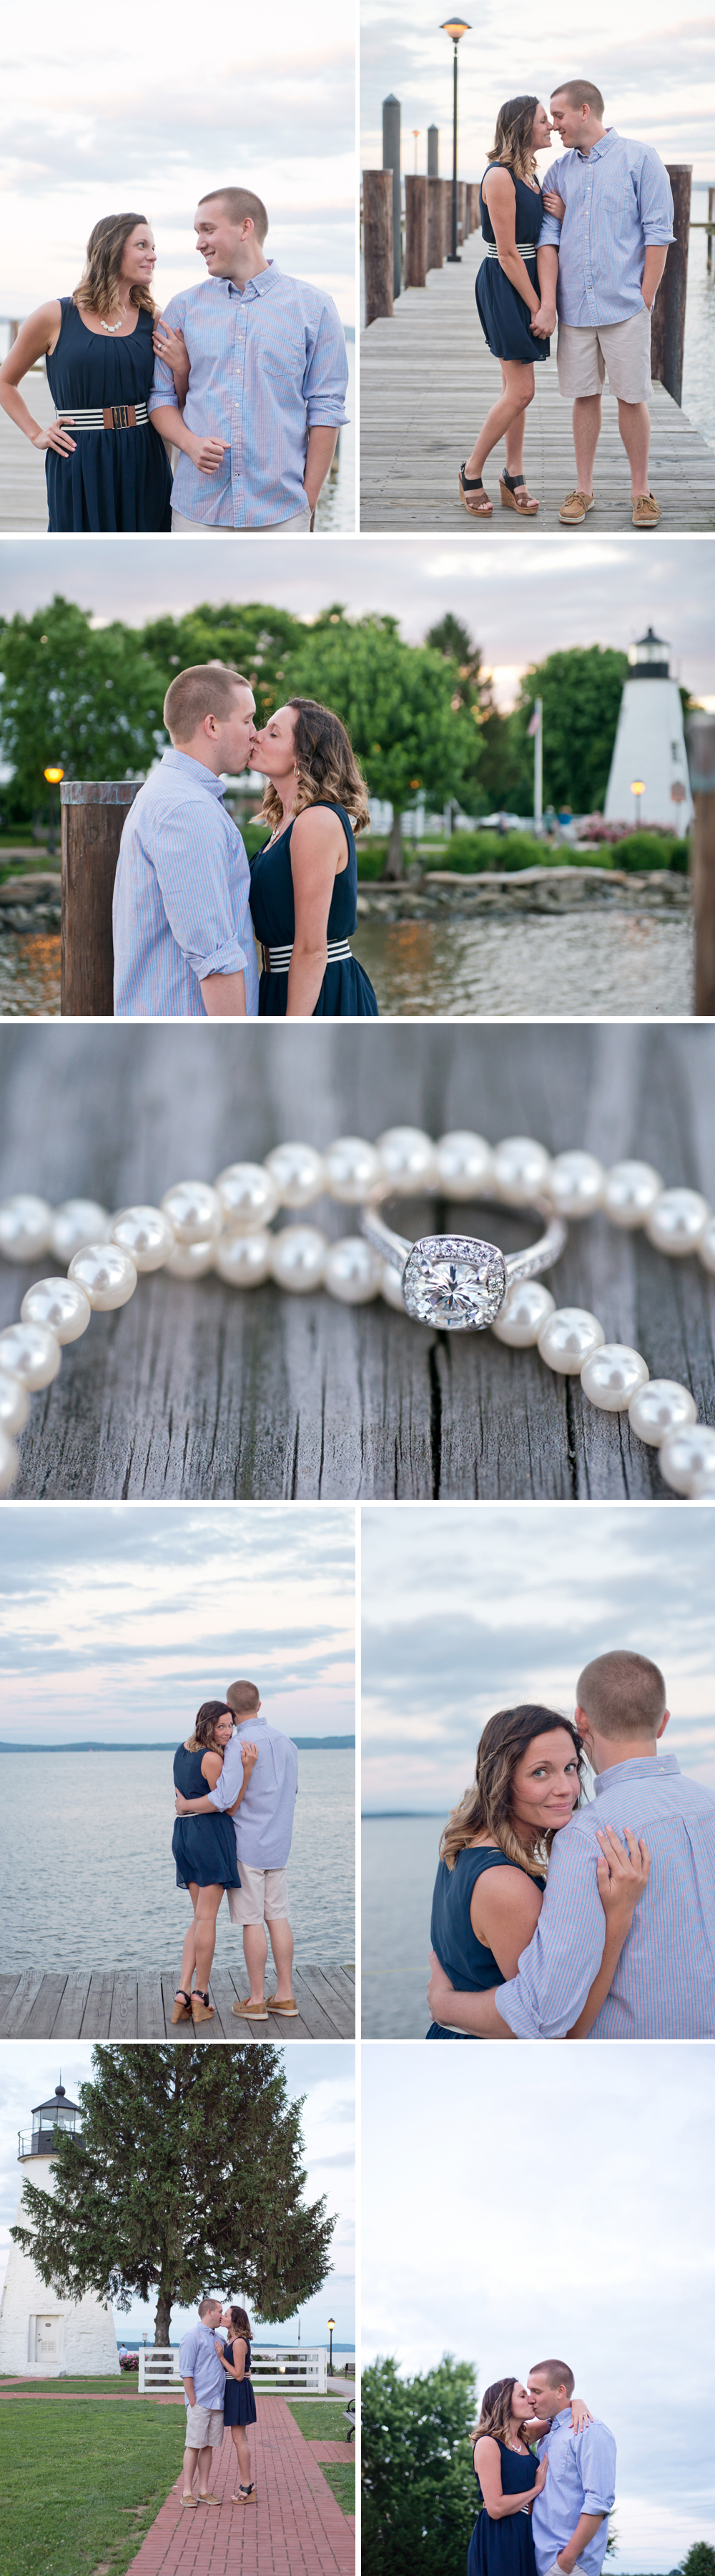 Harford_County_Engagement-13